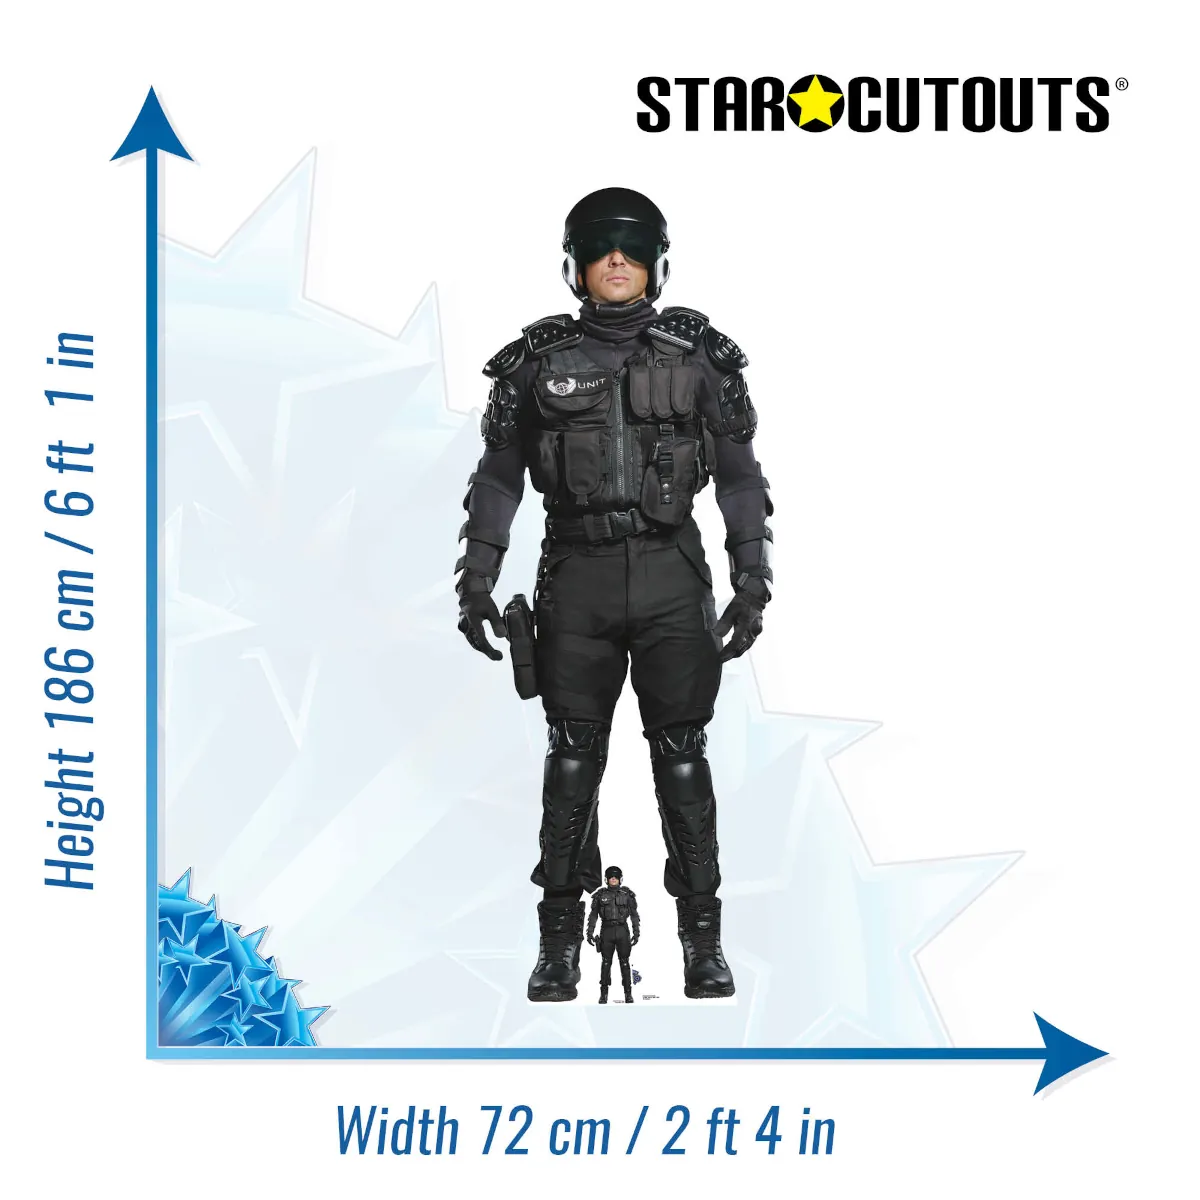 SC4356 UNIT Soldier (Doctor Who) Official Lifesize + Mini Cardboard Cutout Standee Size